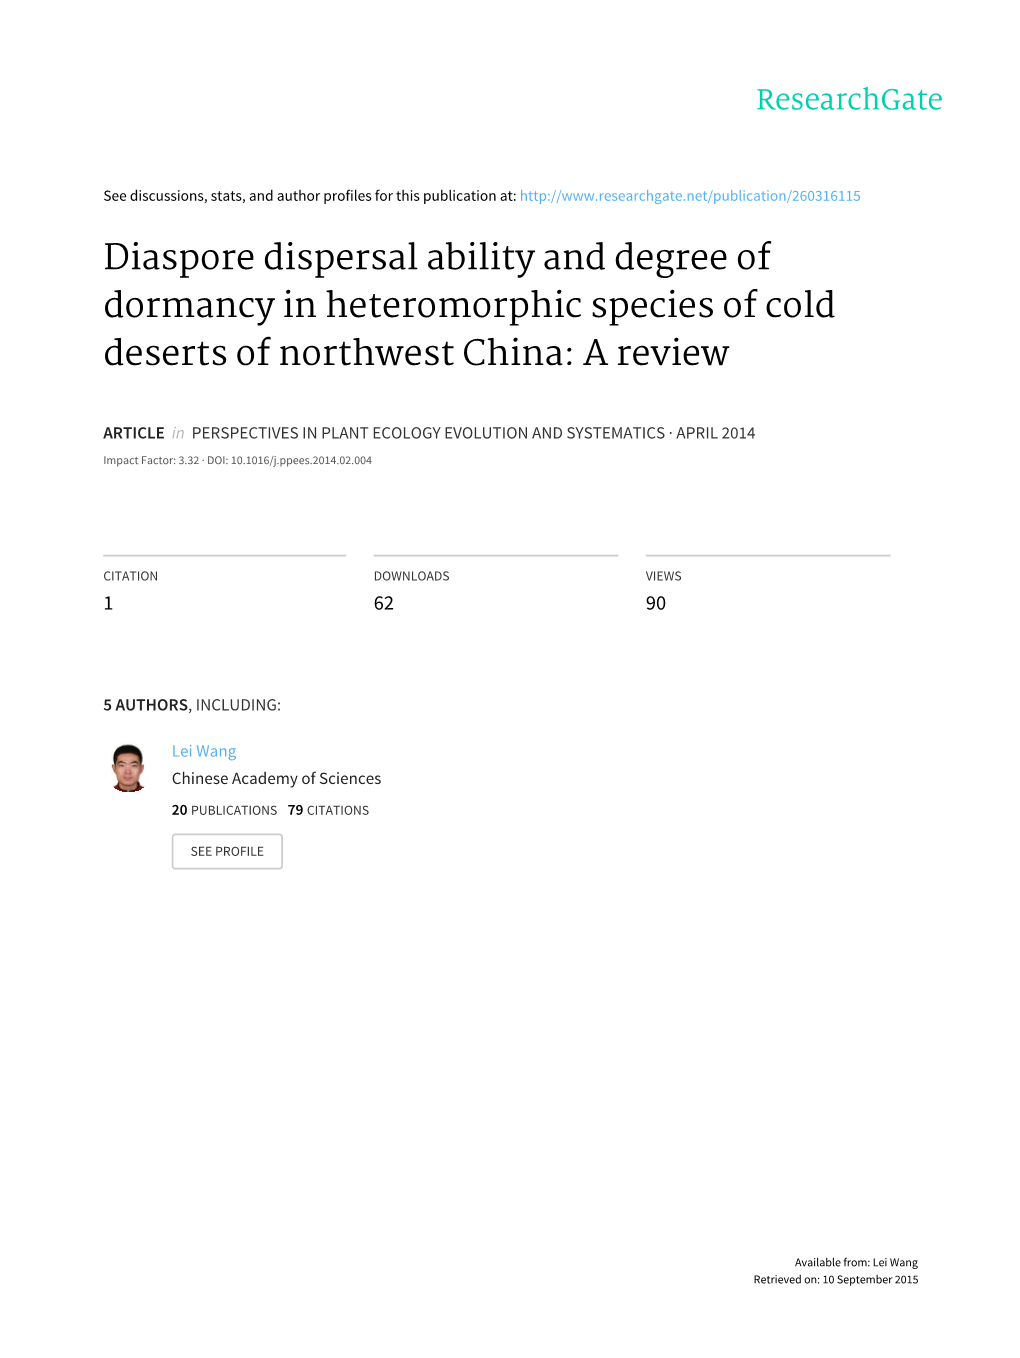 Diaspore Dispersal Ability and Degree of Dormancy in Heteromorphic Species of Cold Deserts of Northwest China: a Review